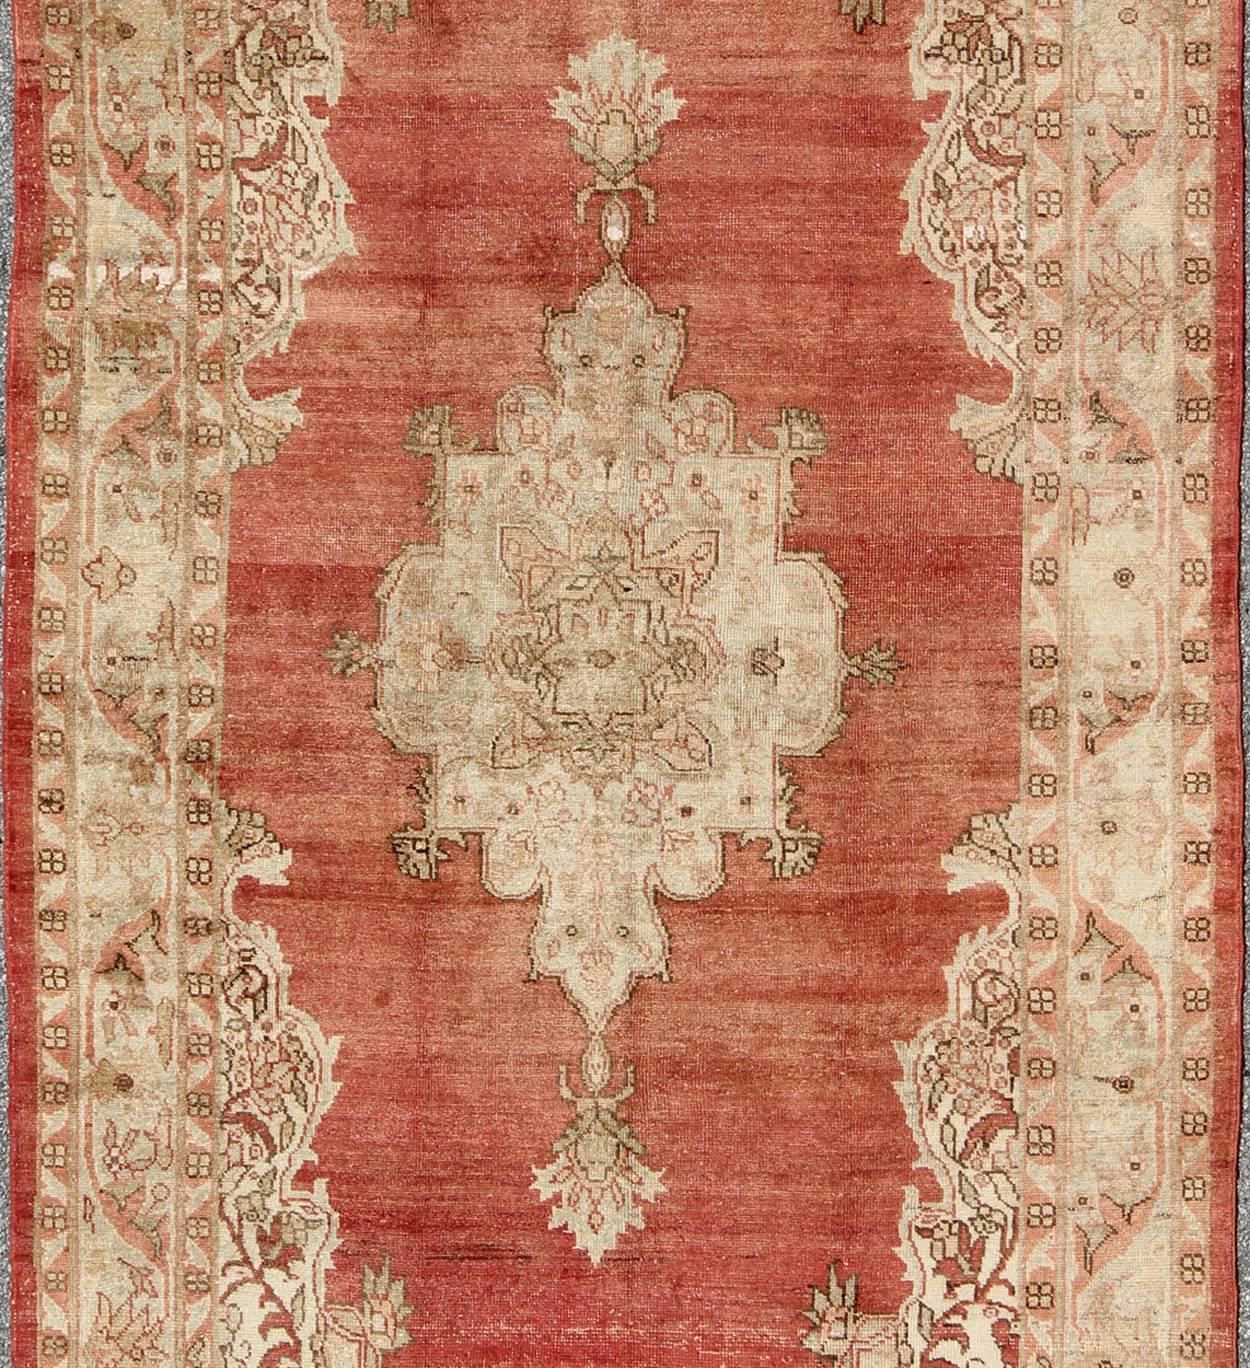 Antique Turkish Oushak Medallion Rug in Soft Red Background, Taupe & Pale Green In Good Condition For Sale In Atlanta, GA